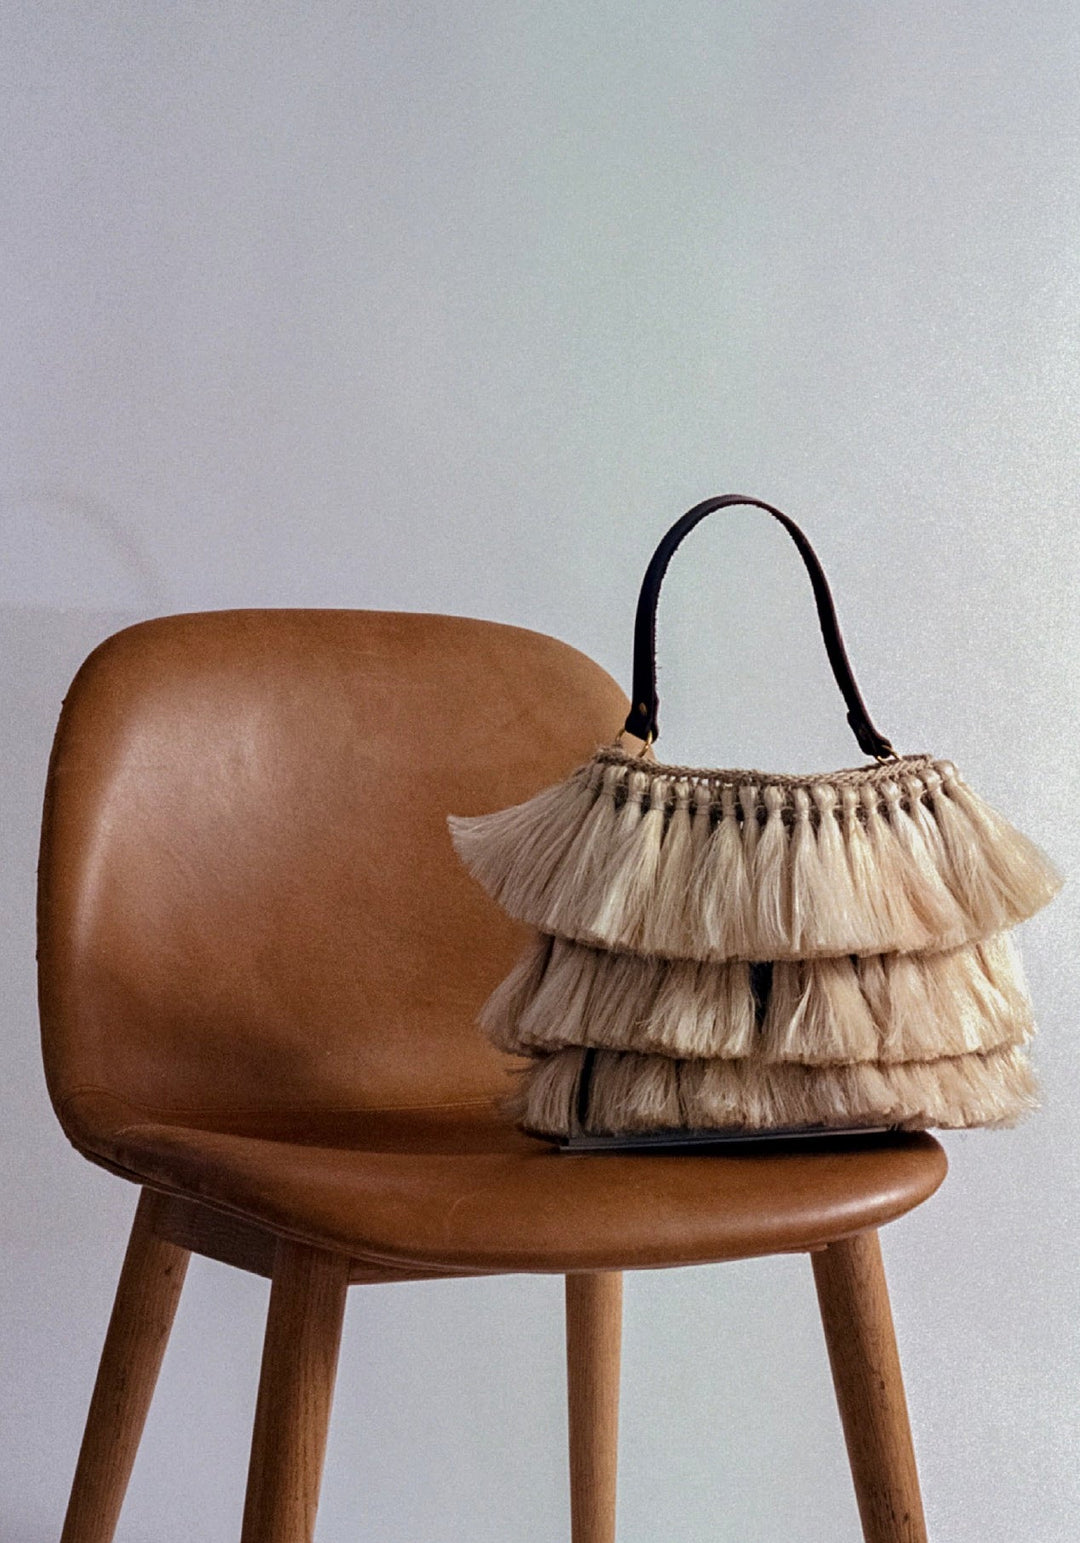 Handwoven tassel bag made from natural fibre on a burnt orange leather chair still life composition.